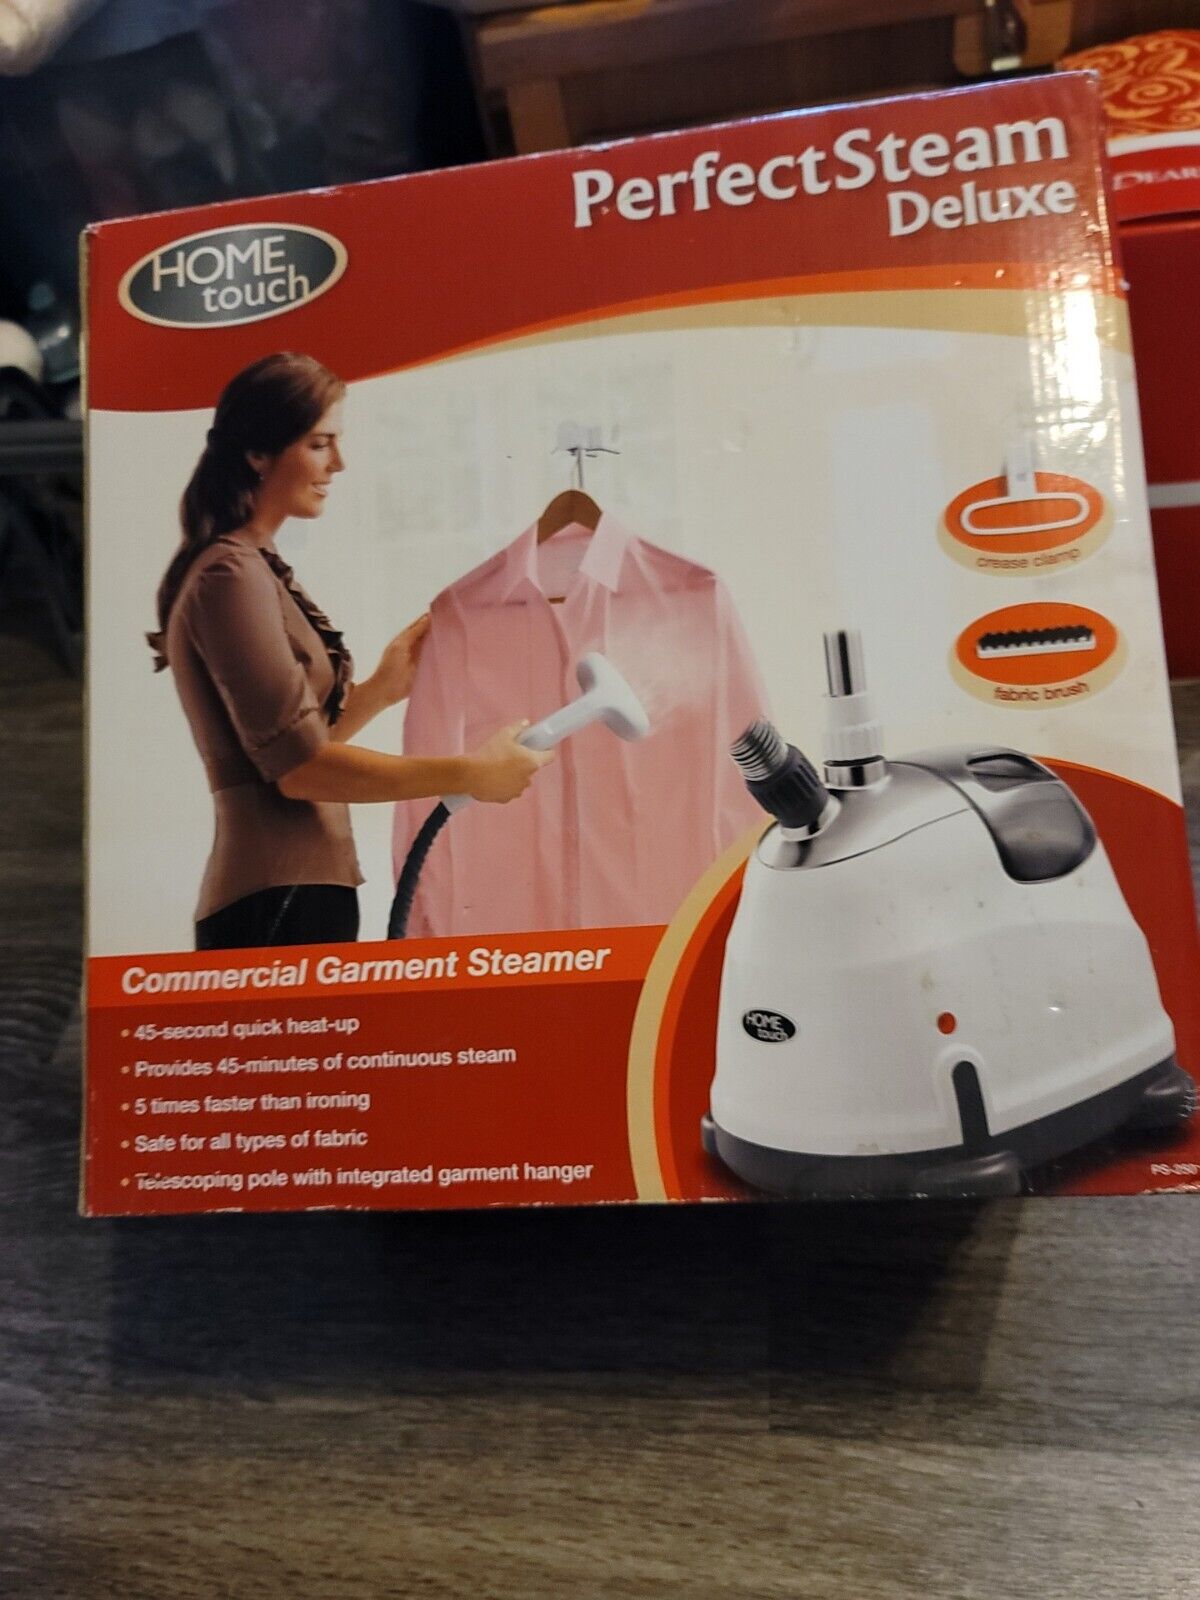 NEW Home Touch Garment Steamer The Perfect Steam Deluxe Commercial Model  PS-250